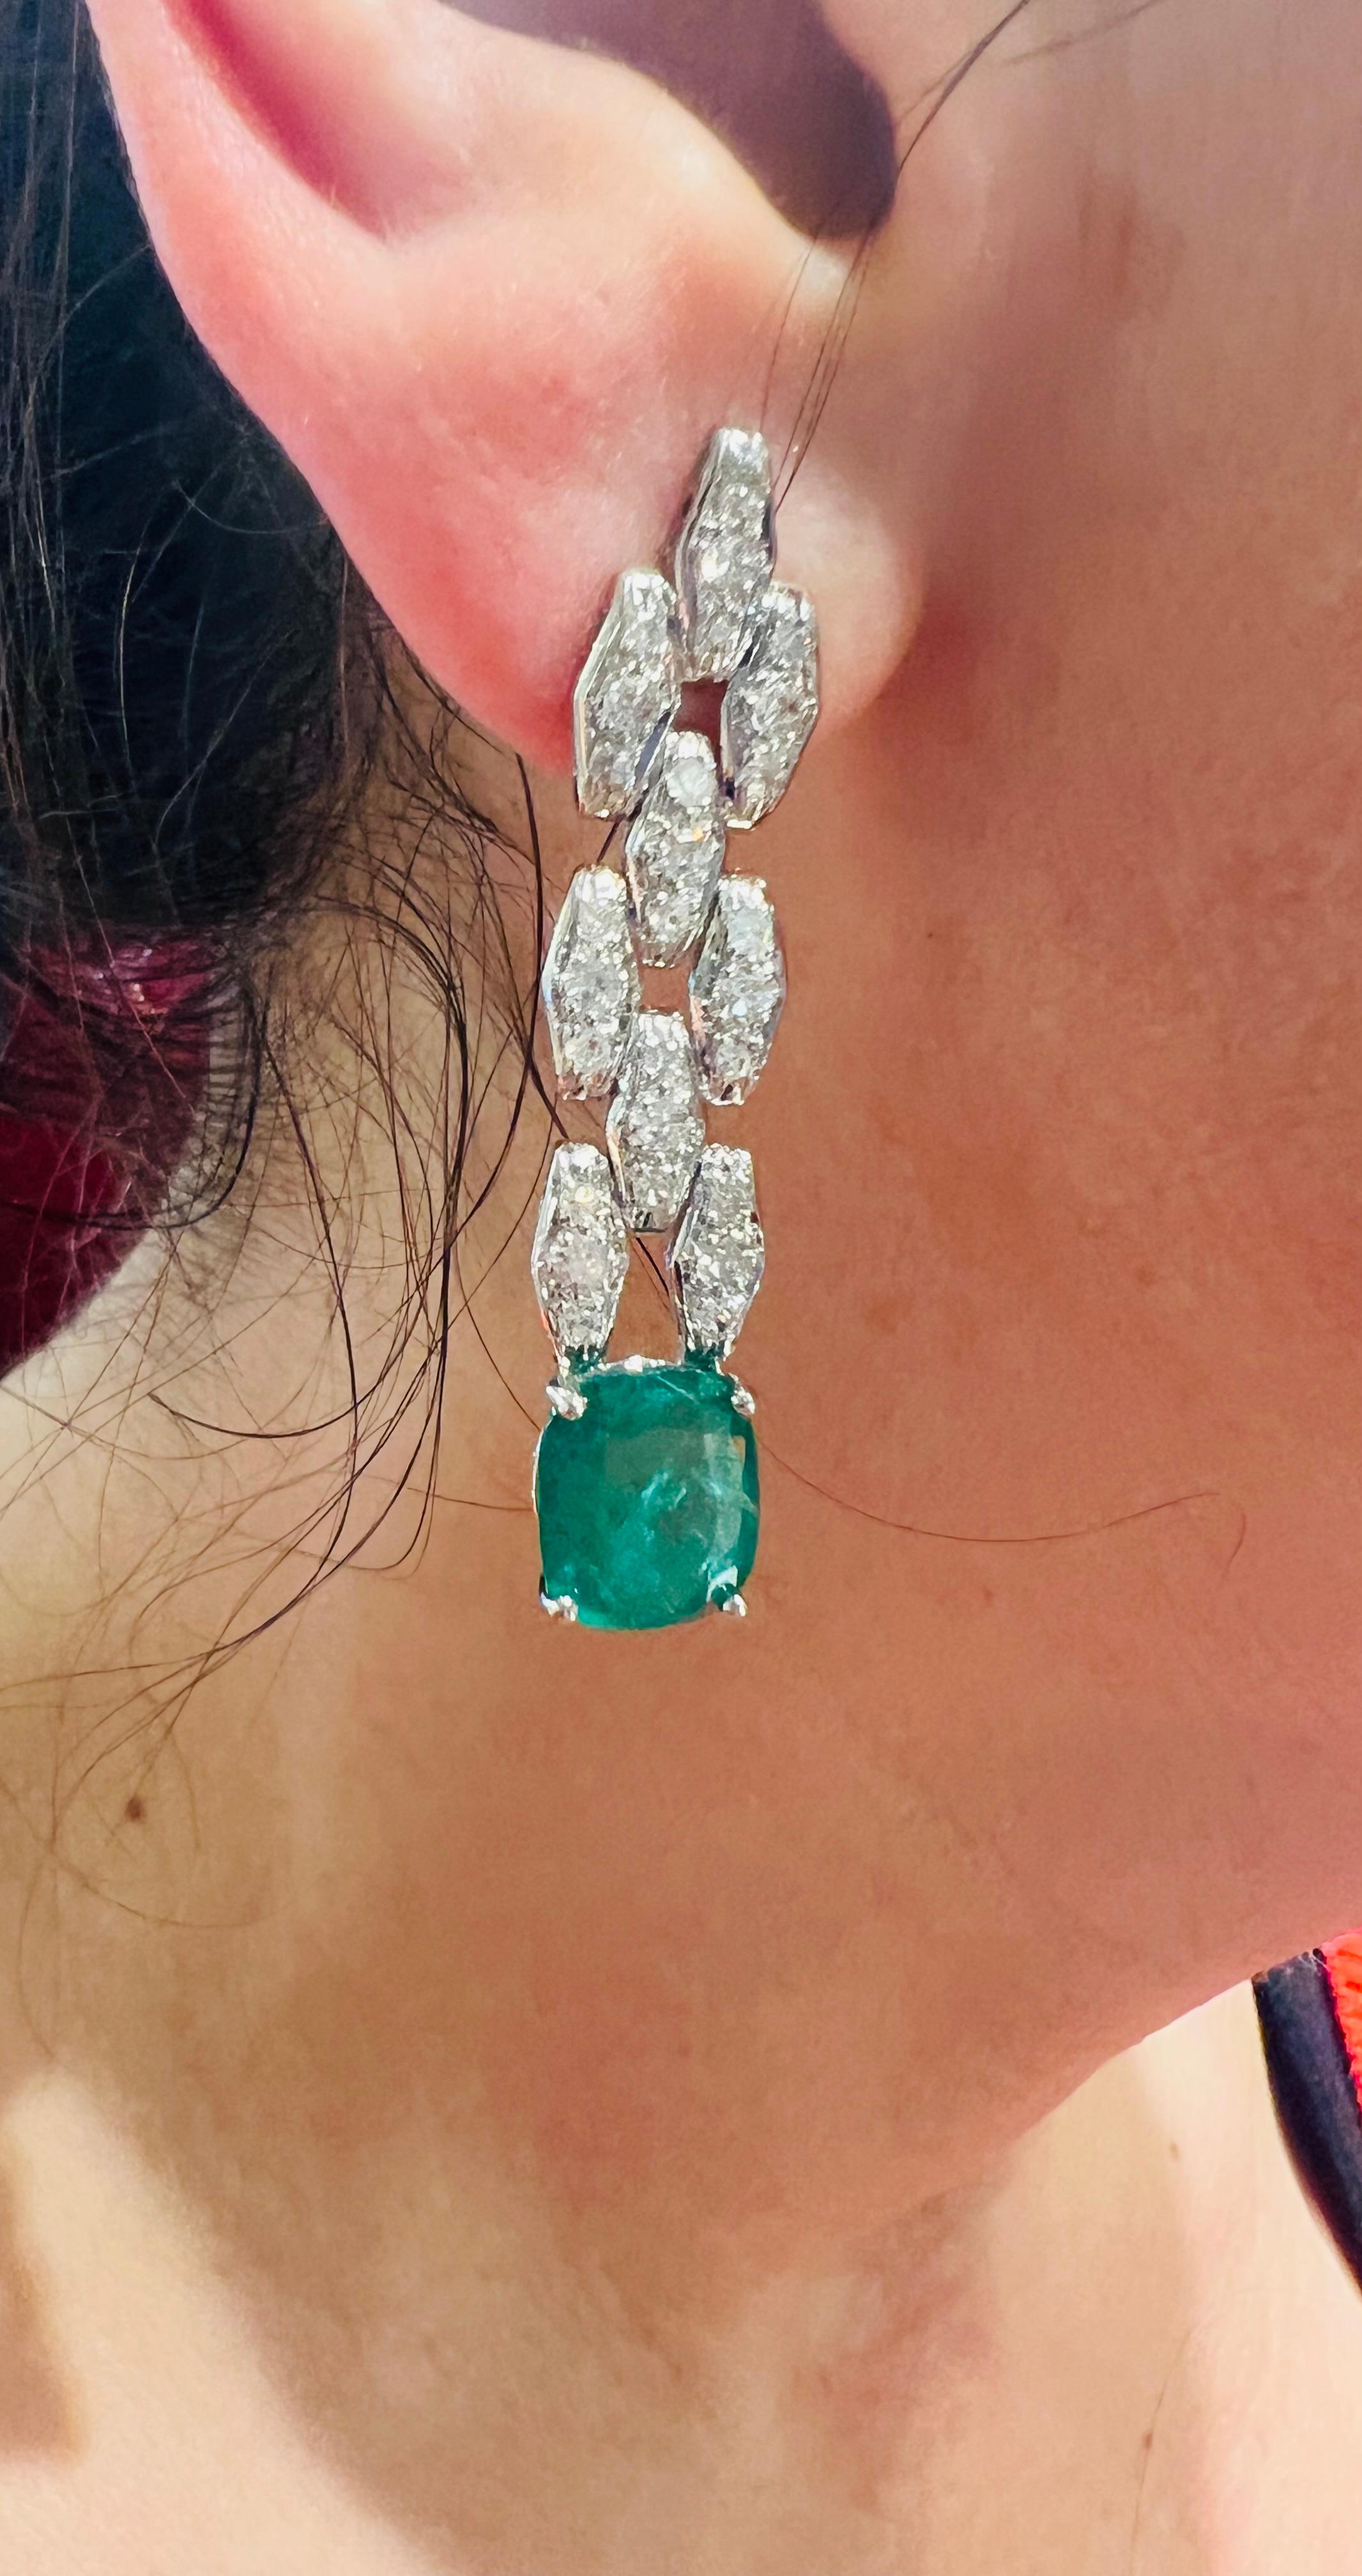 Art Deco pair of platinum  earrings set with 2 emeralds and paved with diamonds